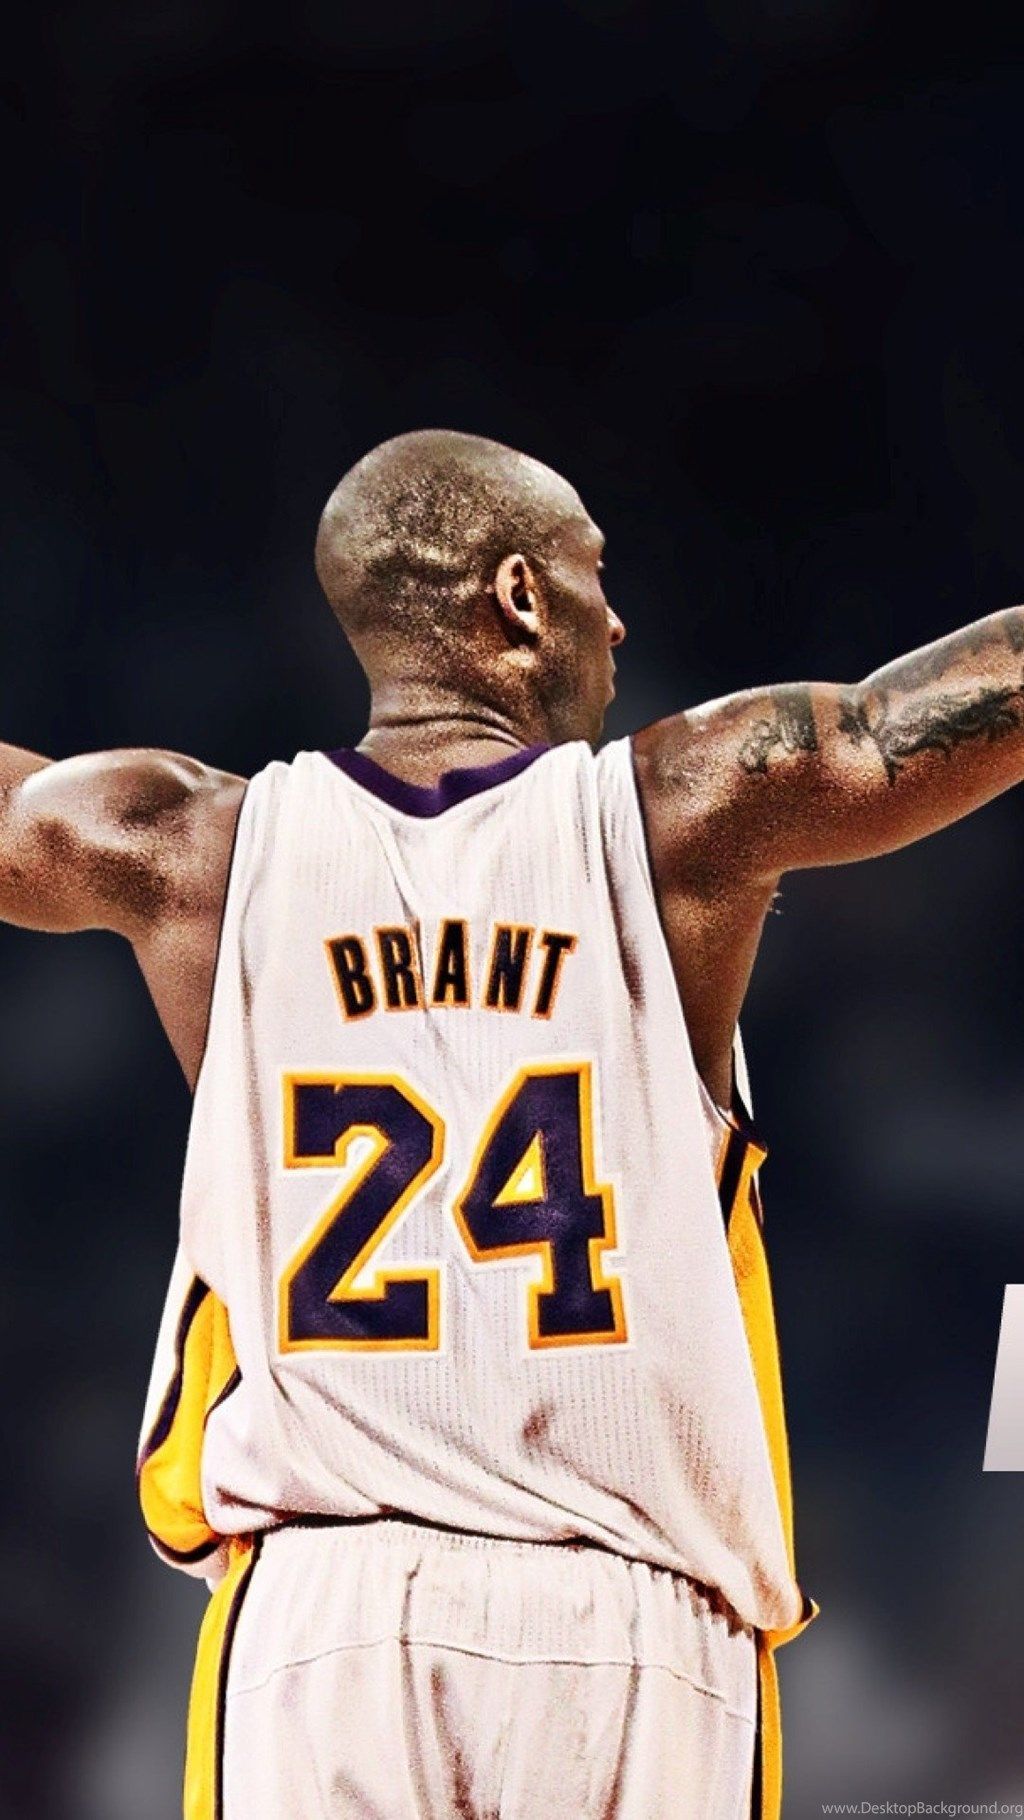 Kobe Bryant/ The Greatest Legend of All Time R.I.P